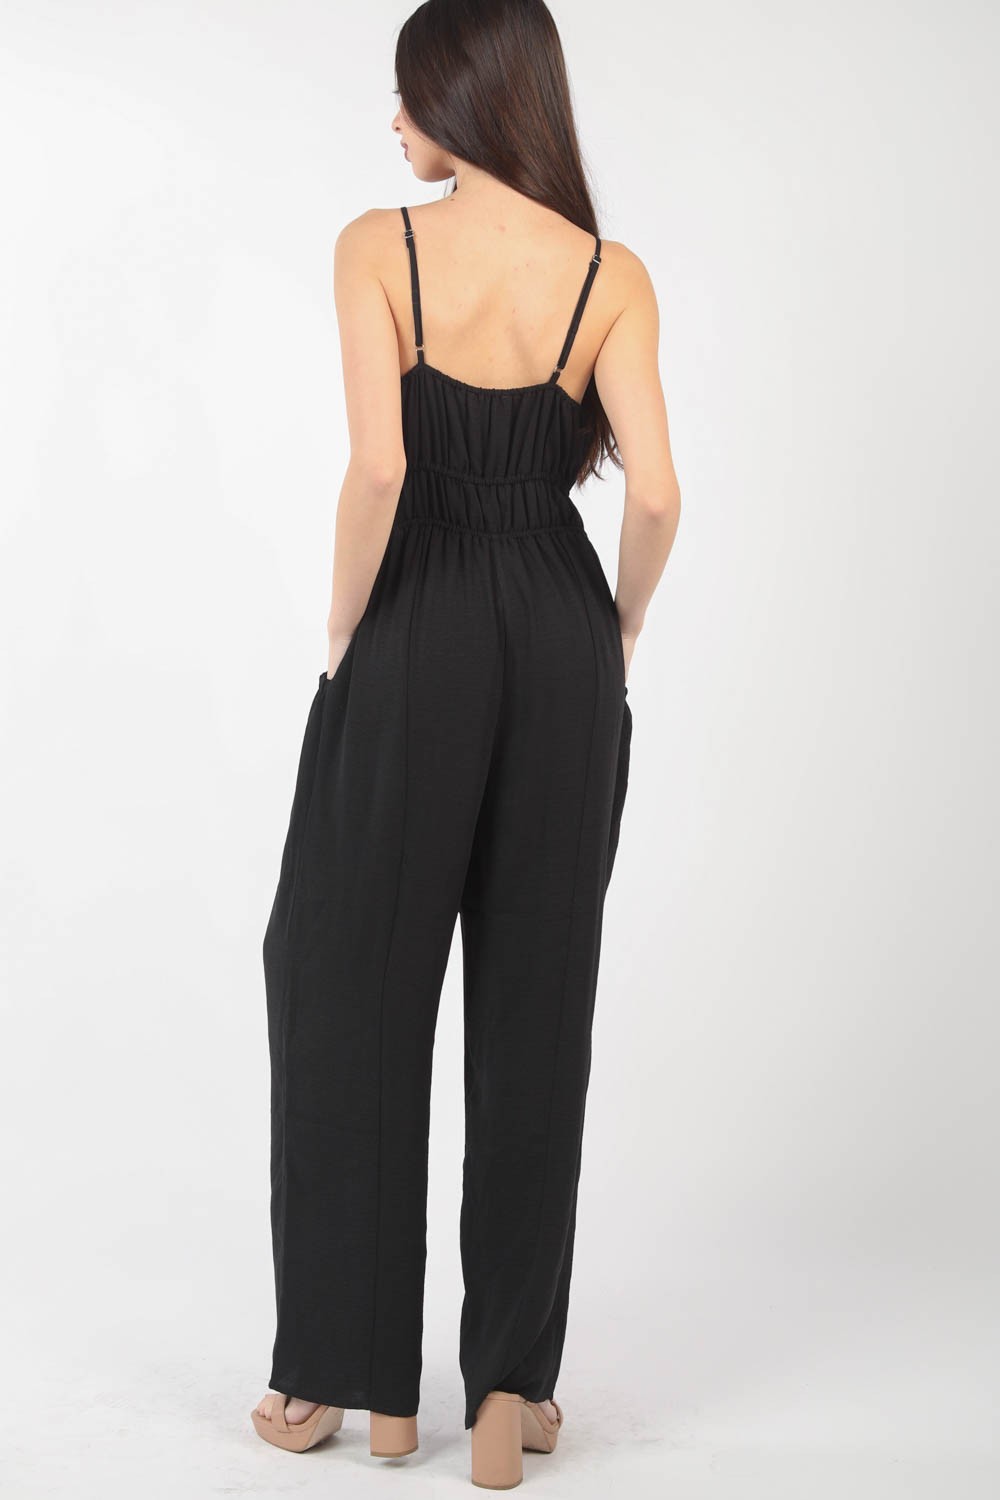 Addison - Pintuck Detail Woven Sleeveless Jumpsuit - Black - Exclusively Online